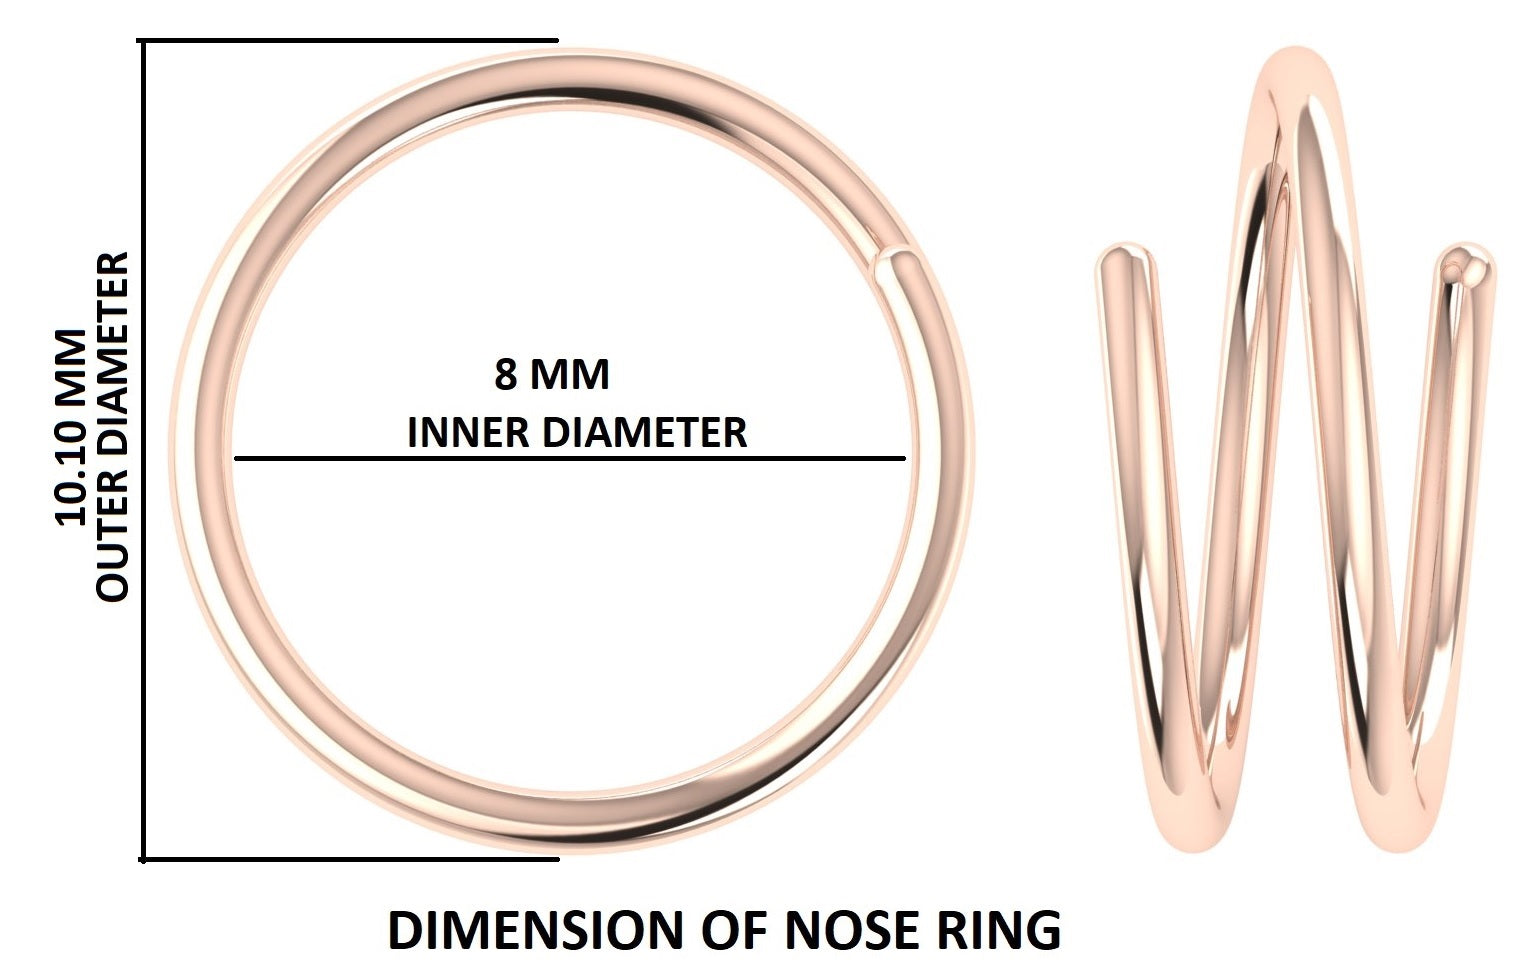 Nose Ring, Double Nose Ring for Single Piercing, Hoop Ring, Nose Stud, Rose Gold Nose Ring, Twisted Piercing Hoop, Plain Nose Ring, KD1137